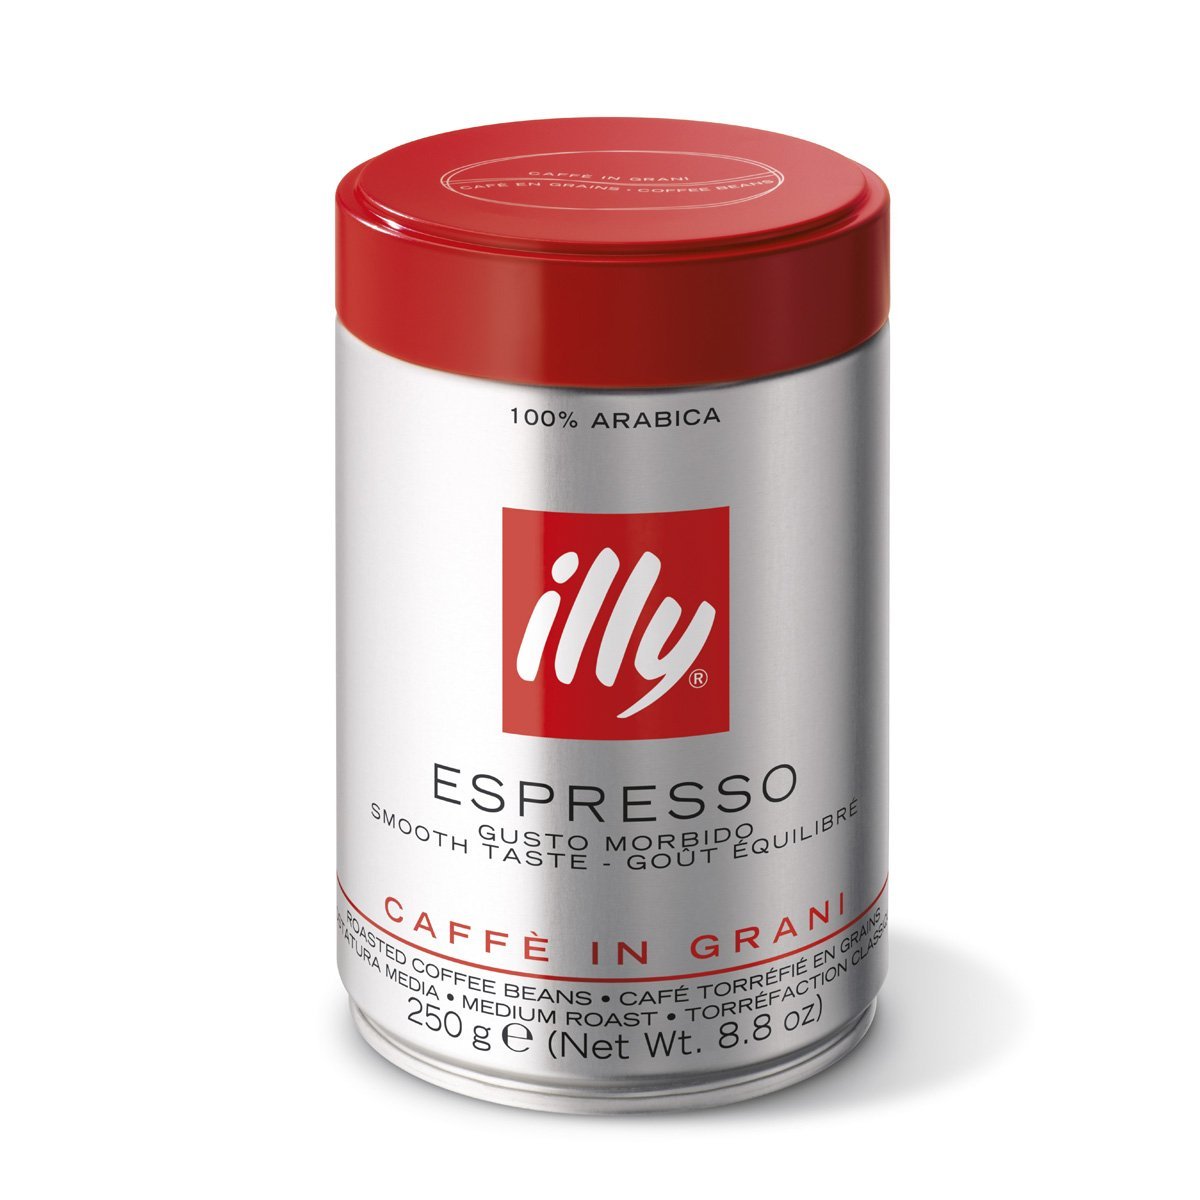  Caf   Illy  Normal en Grano 250 Grs